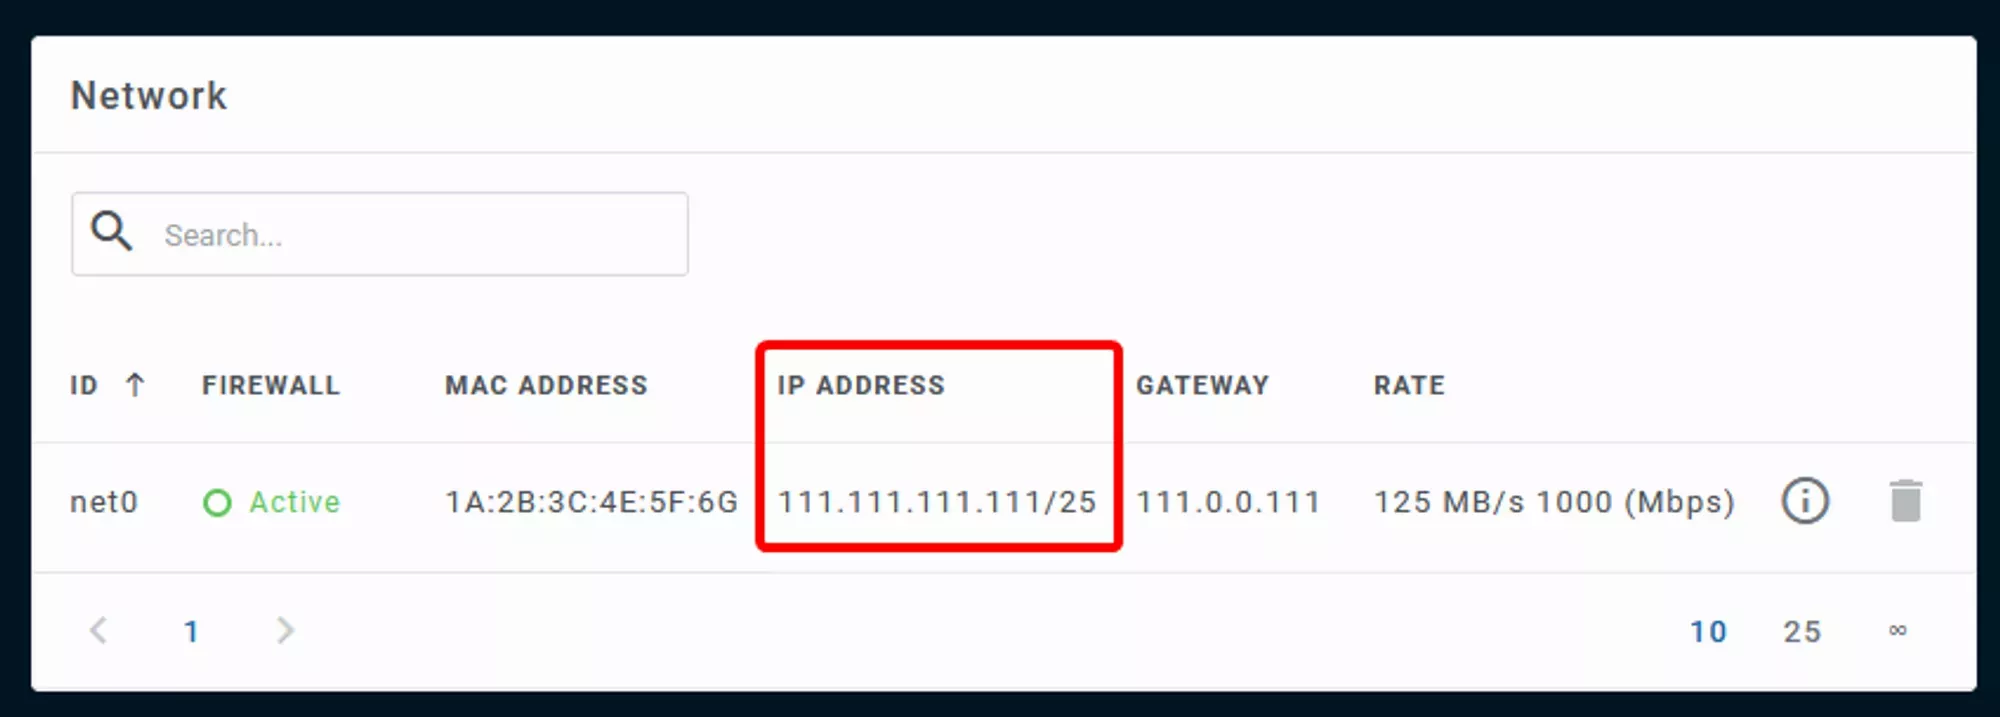 The Network Pane with the IP Address field highlighted, the 4th column in the table